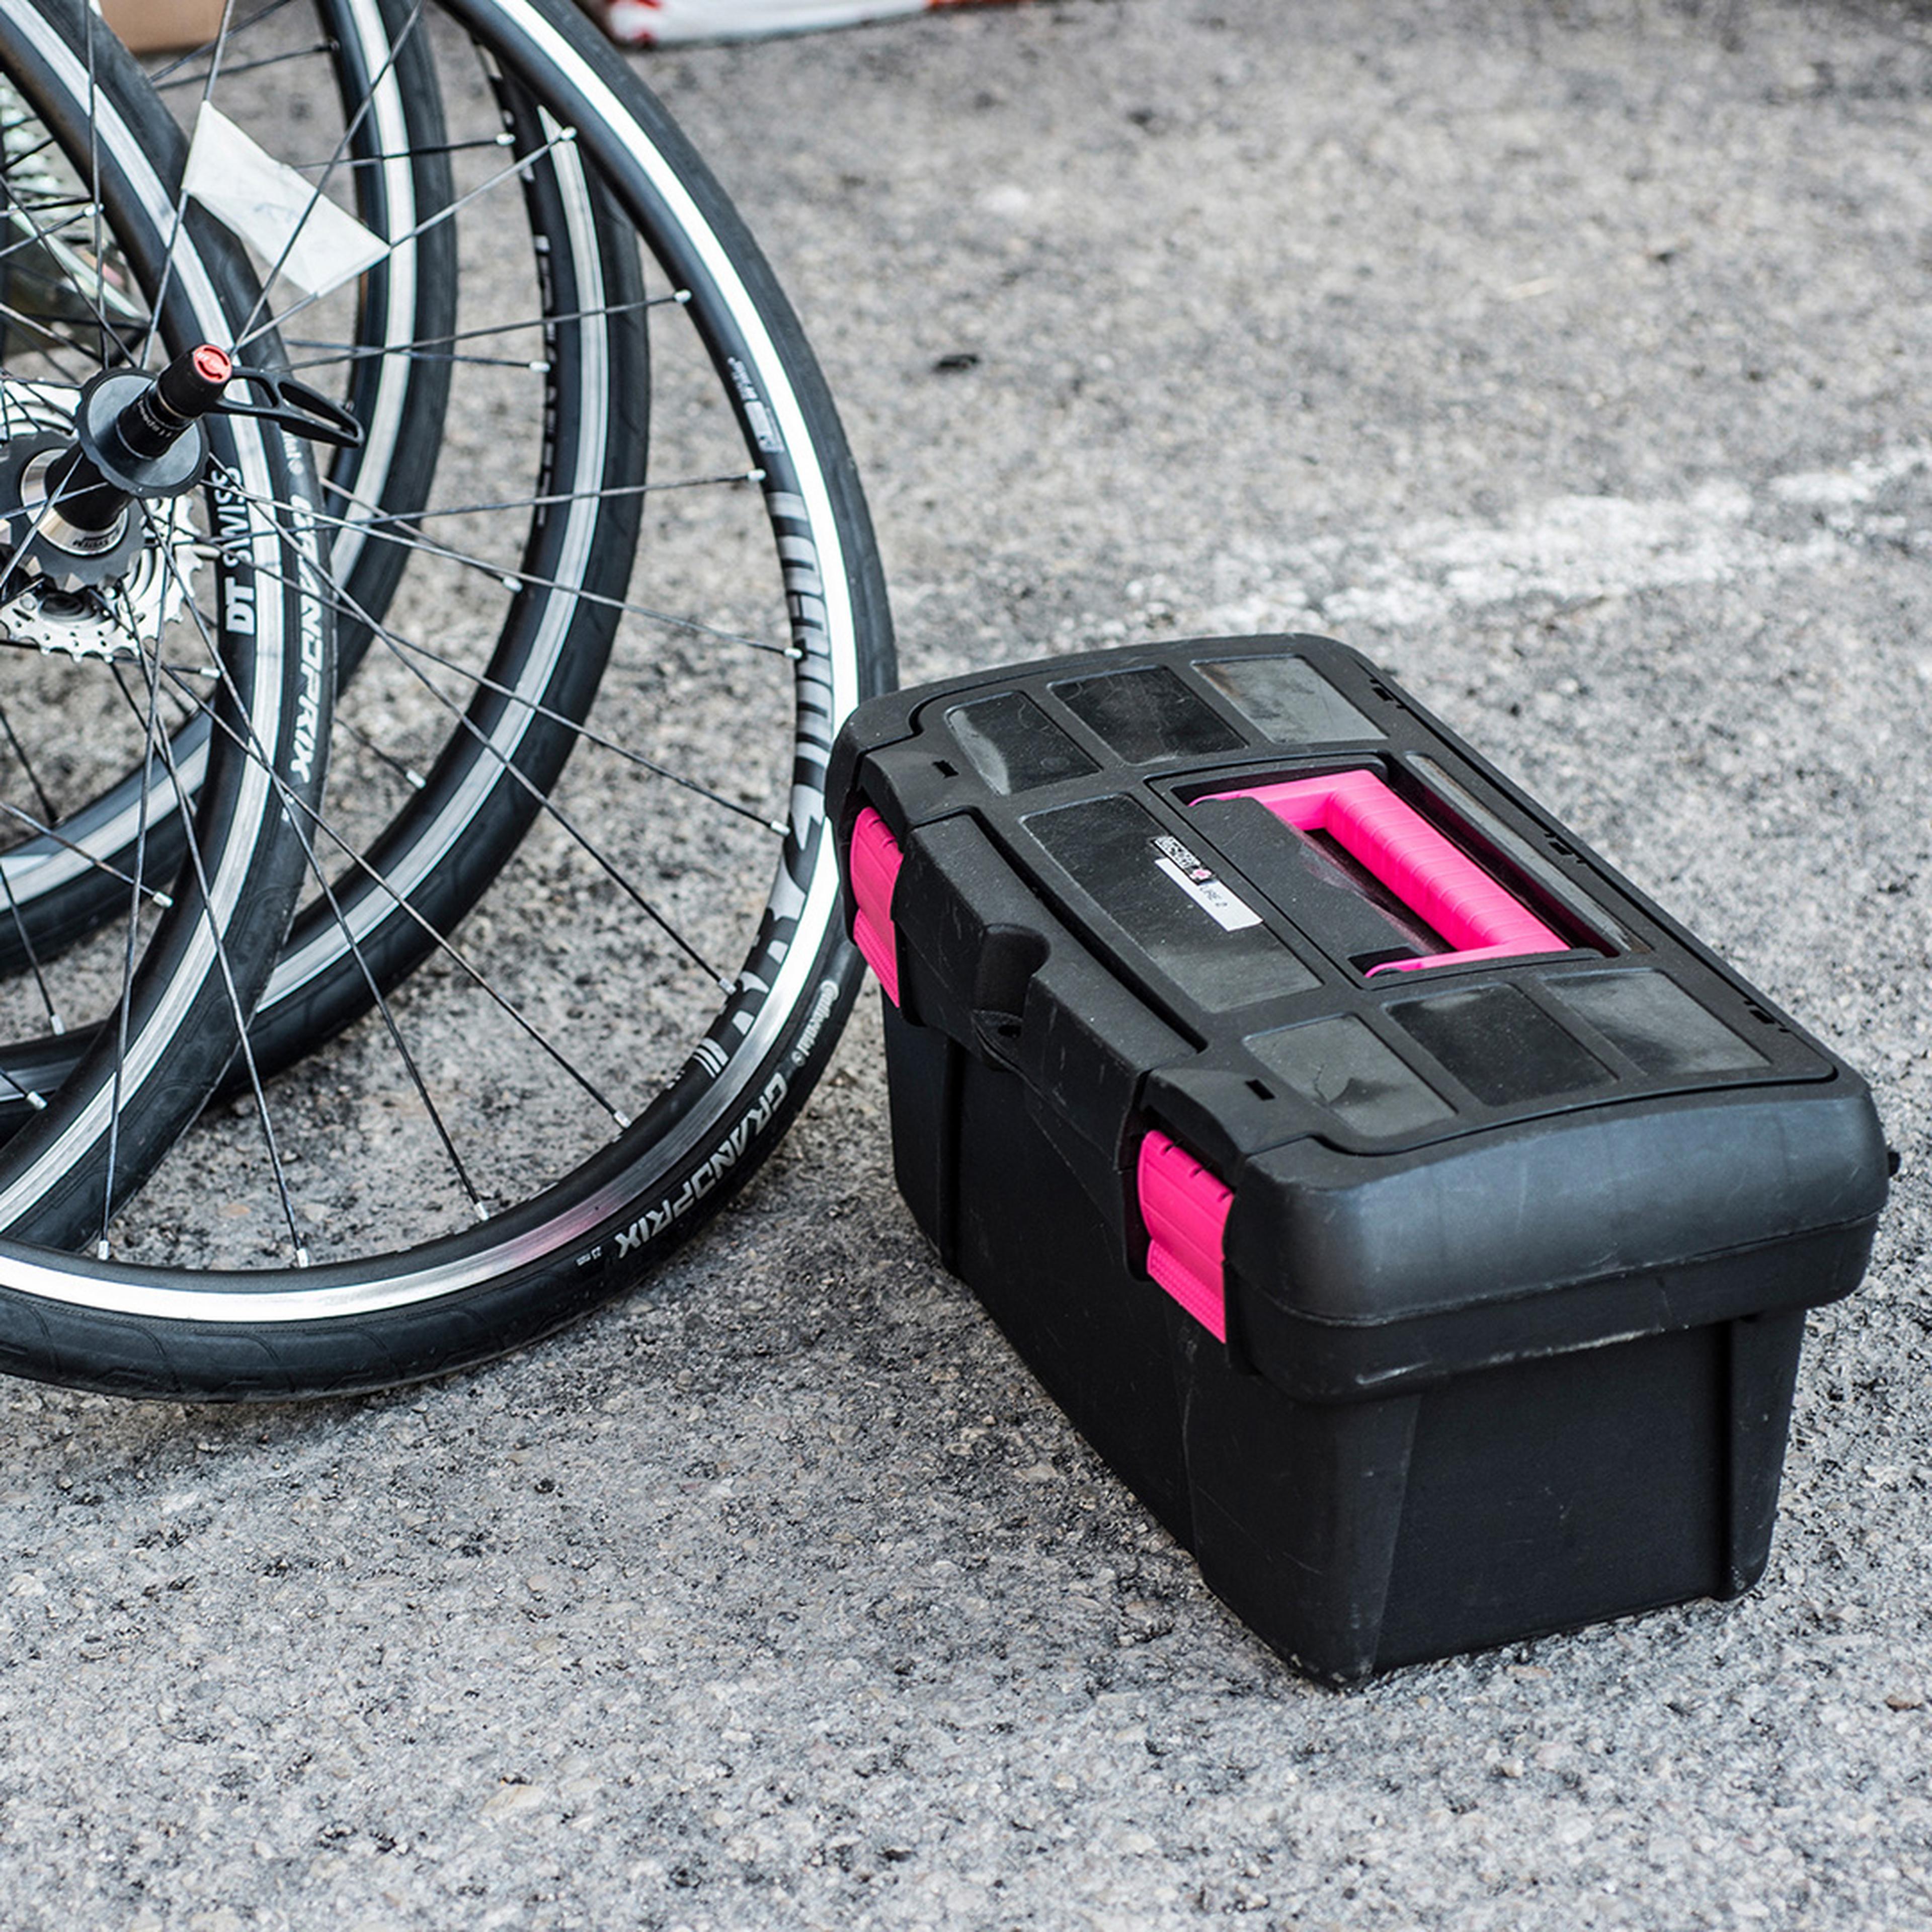 MUC Off Ultimate Bicycle Cleaning Kit